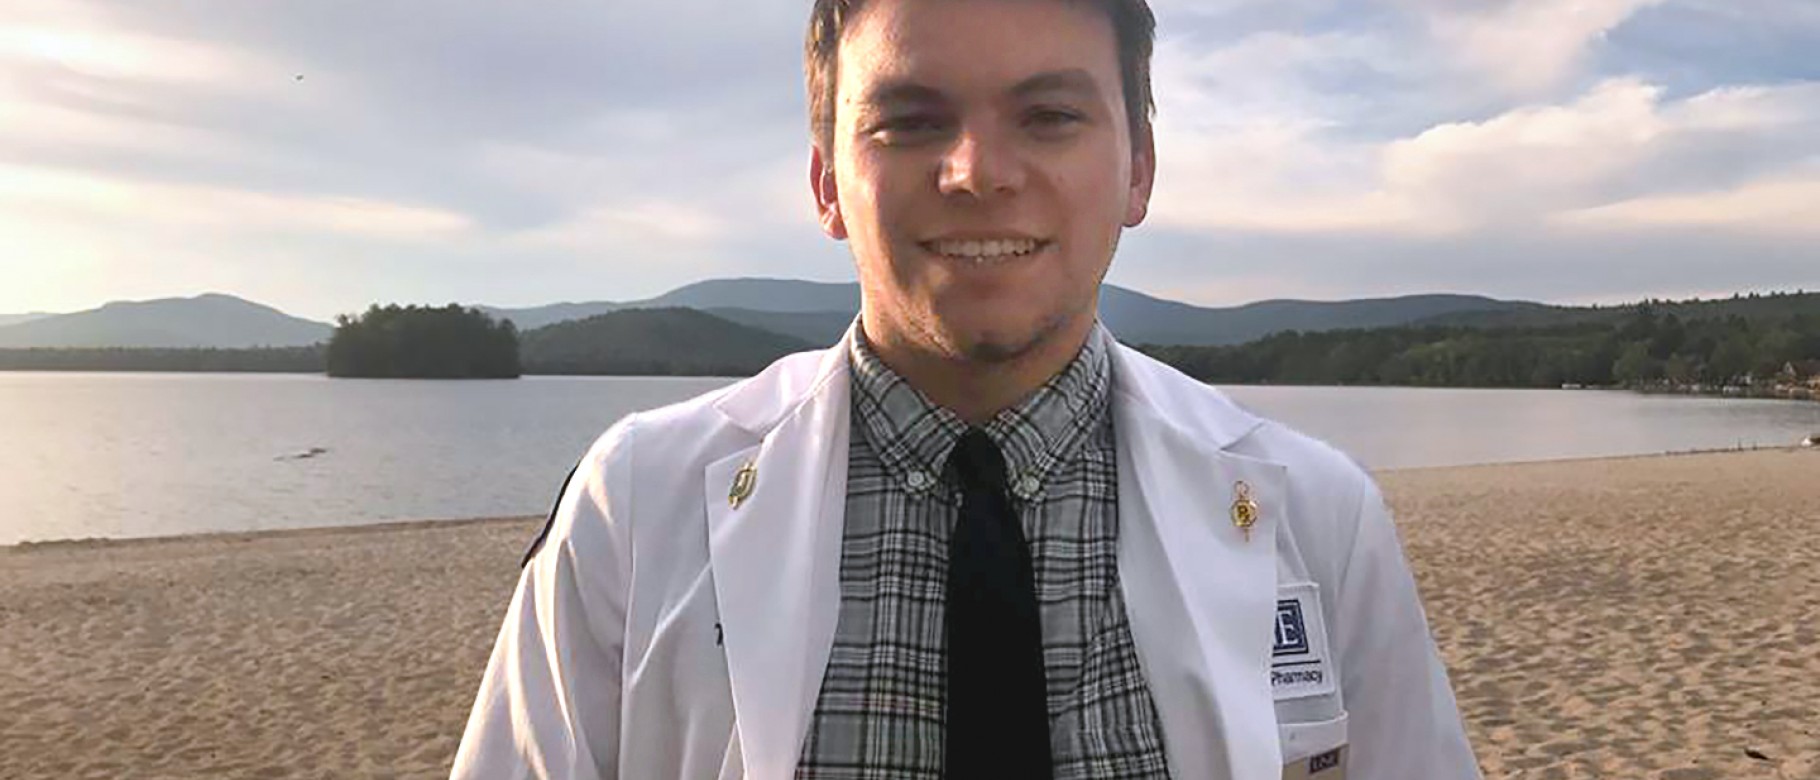 College of Pharmacy Travis Frost student awarded national scholarship